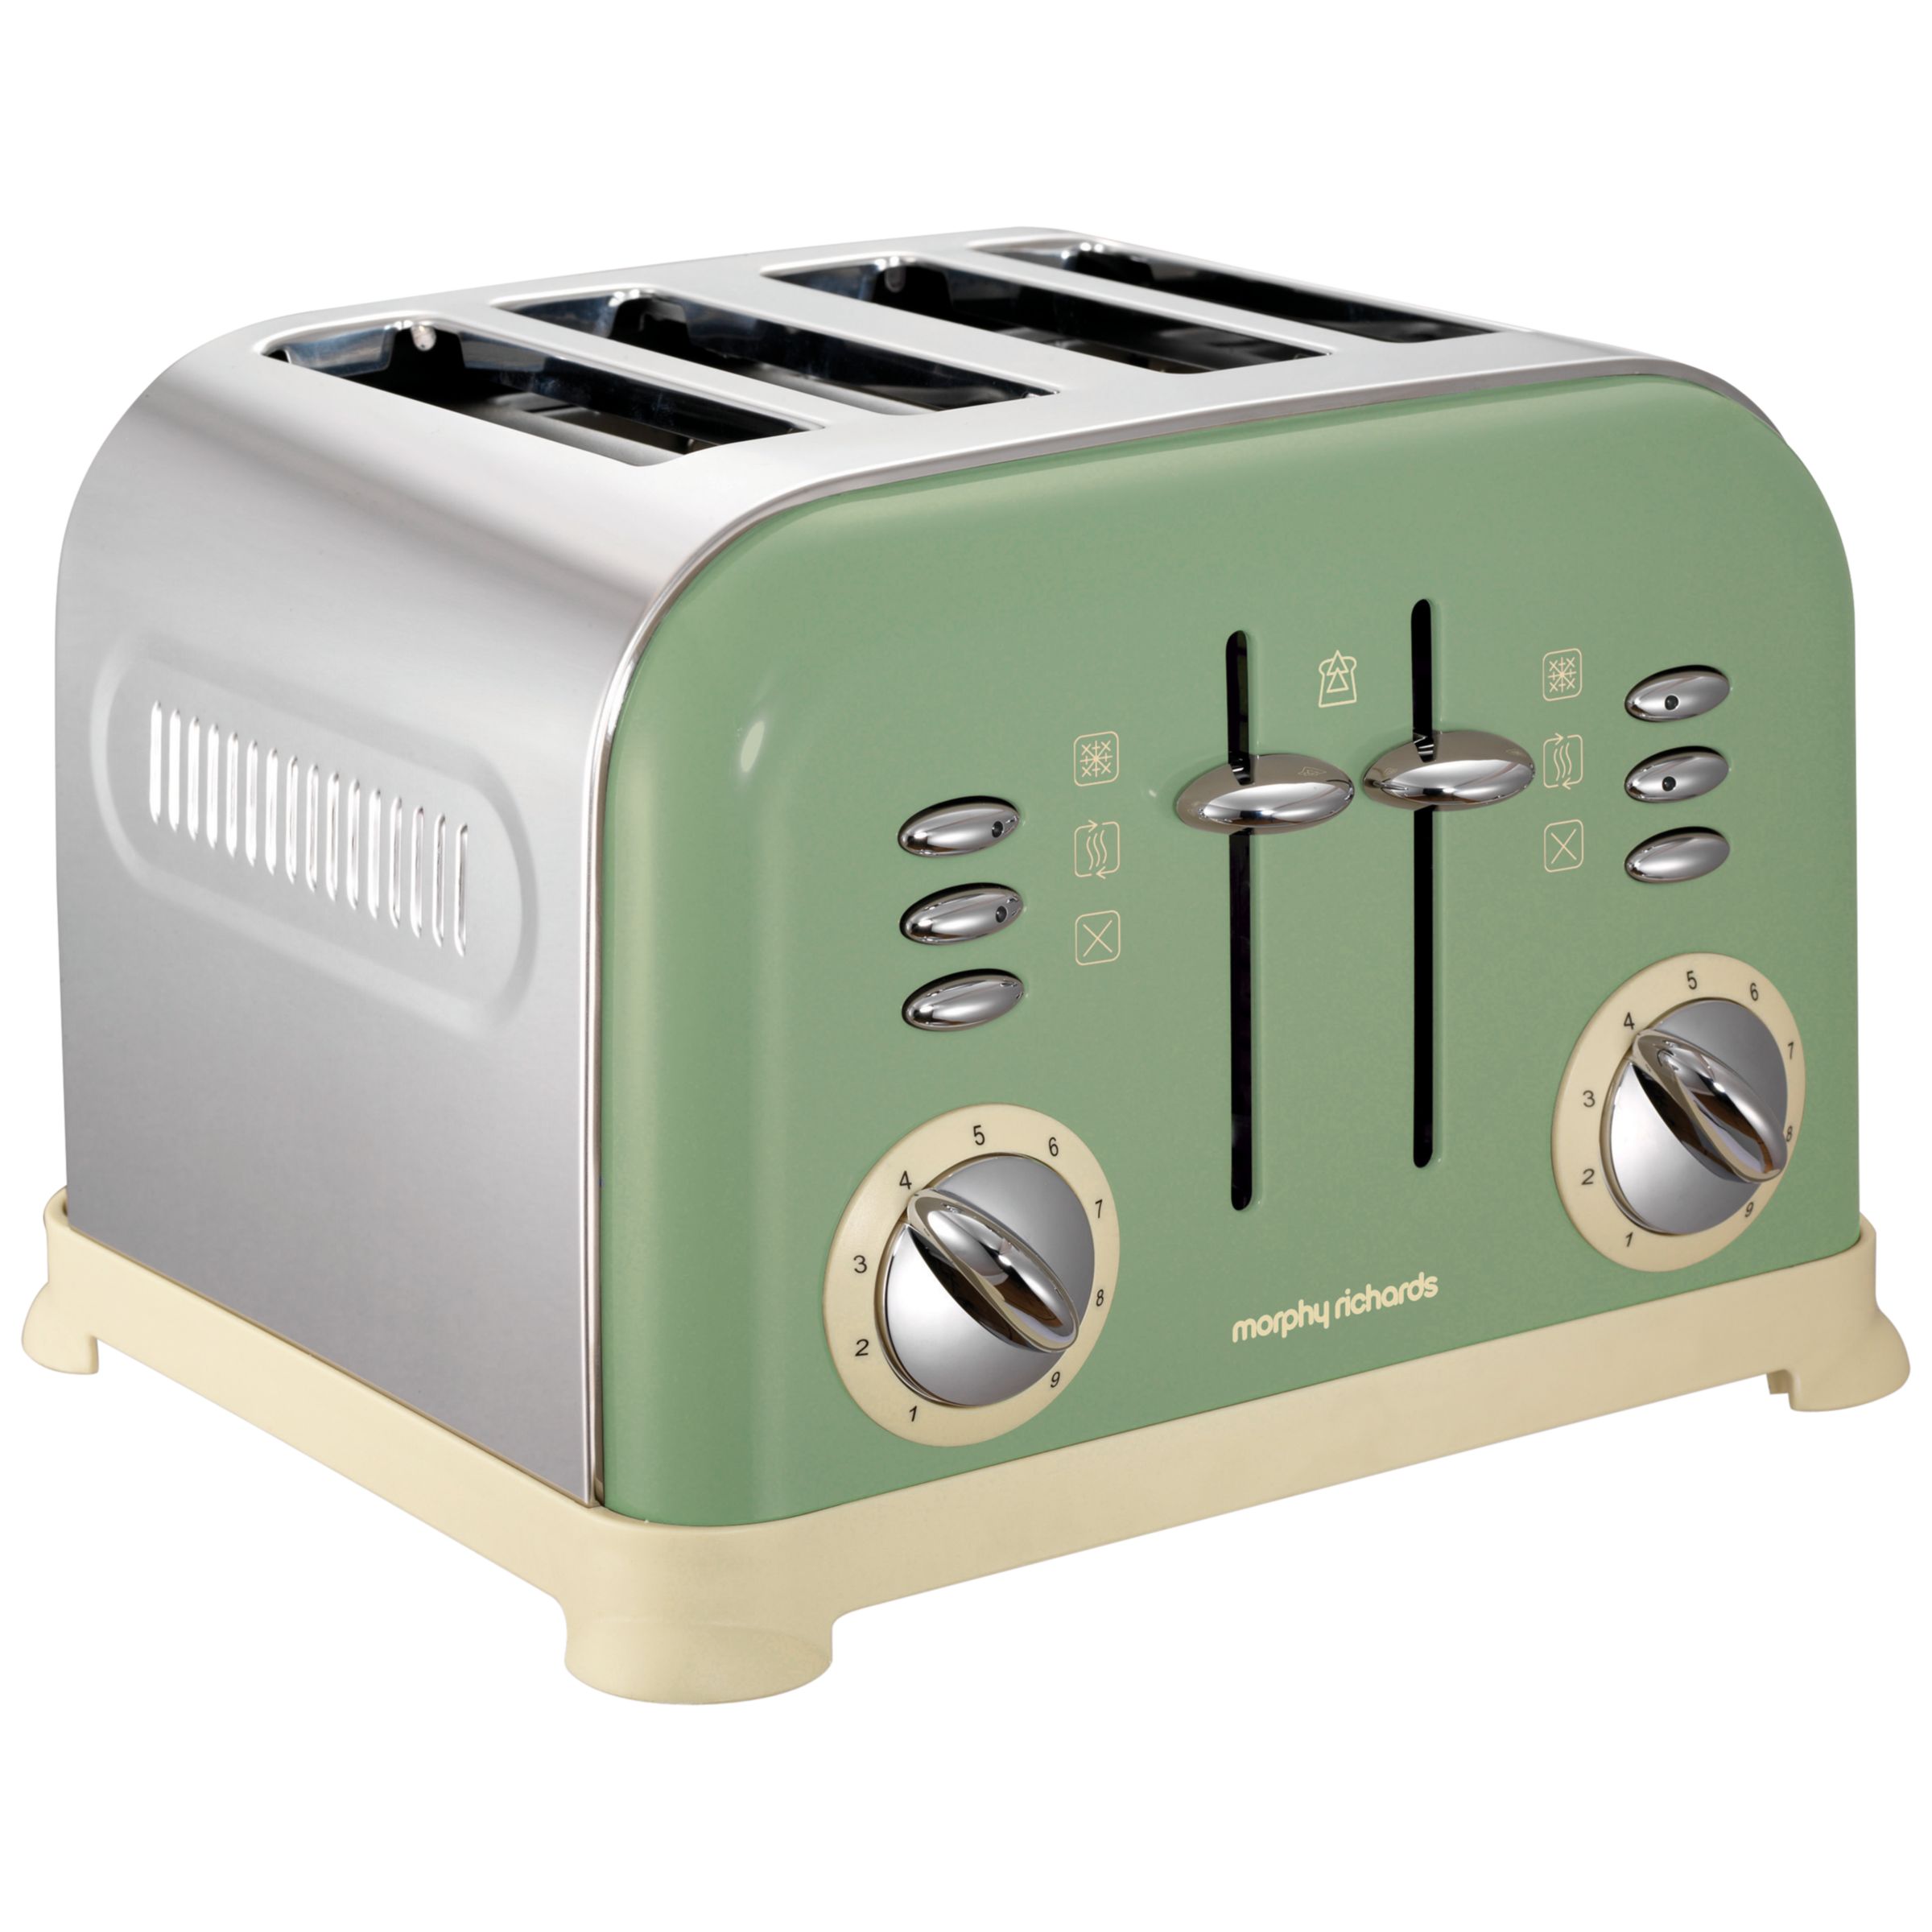 Morphy Richards 242001 Accents 4-Slice Toaster, Sage Green